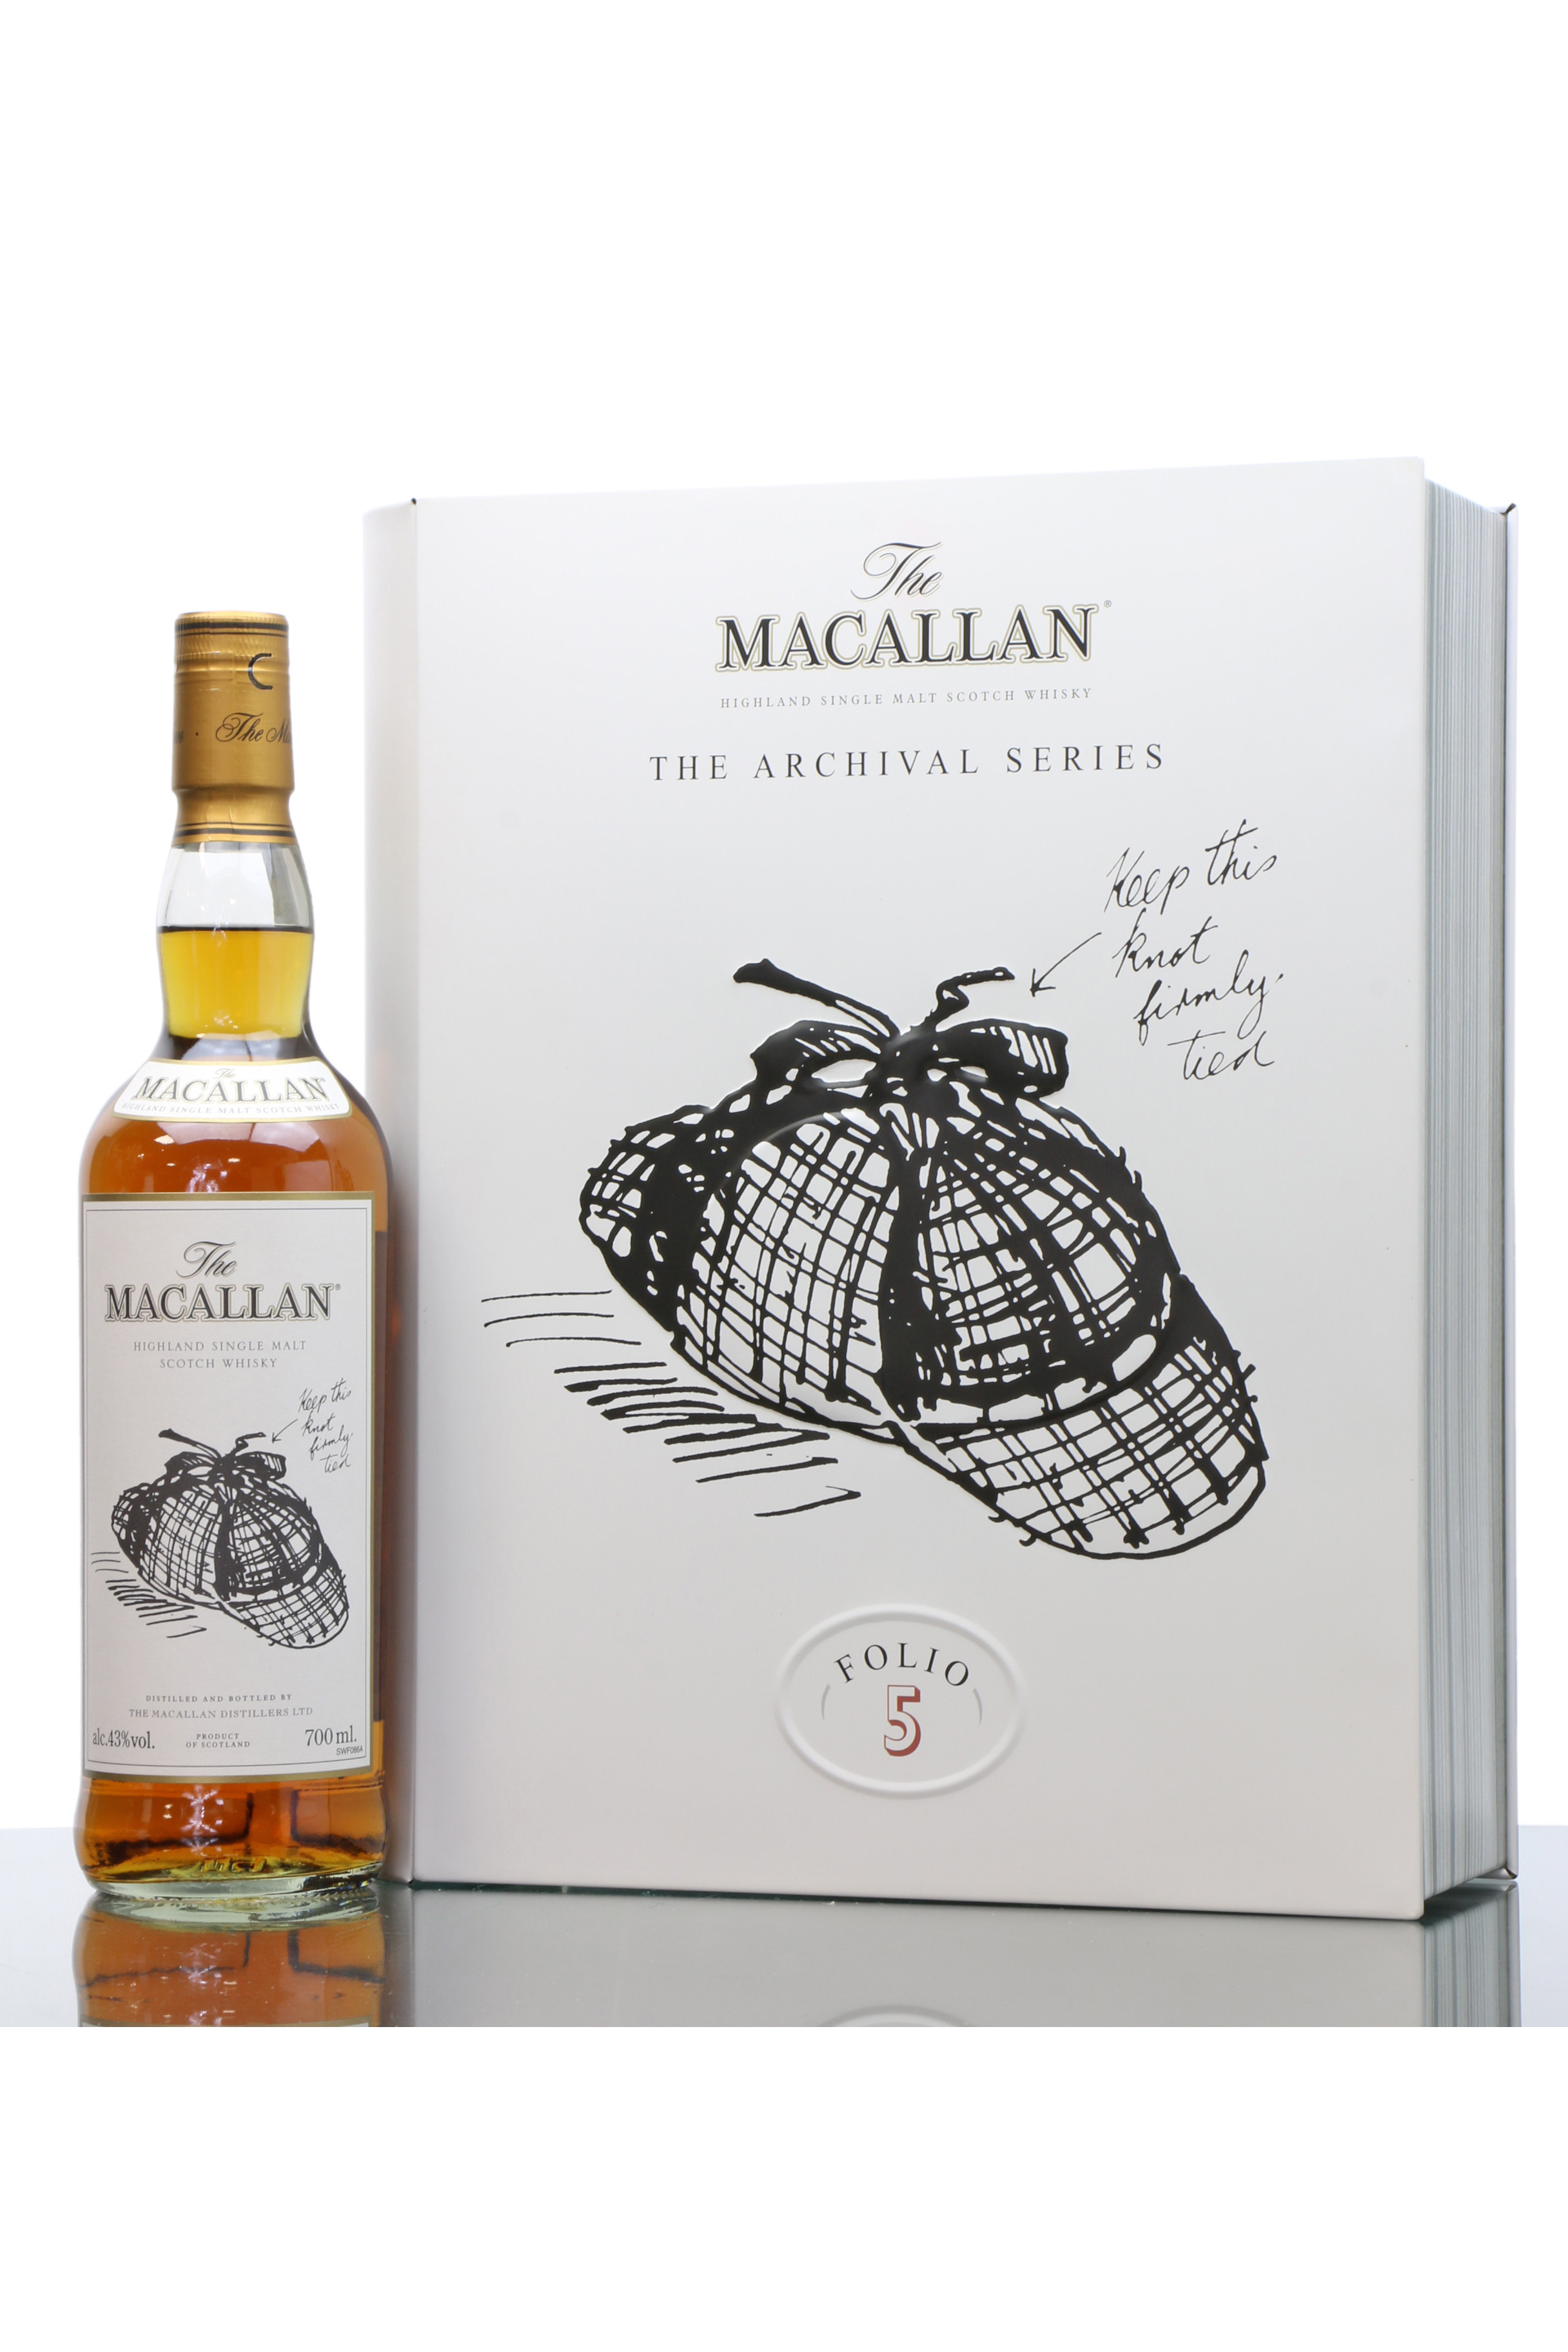 Macallan The Archival Series Folio 5 Just Whisky Auctions